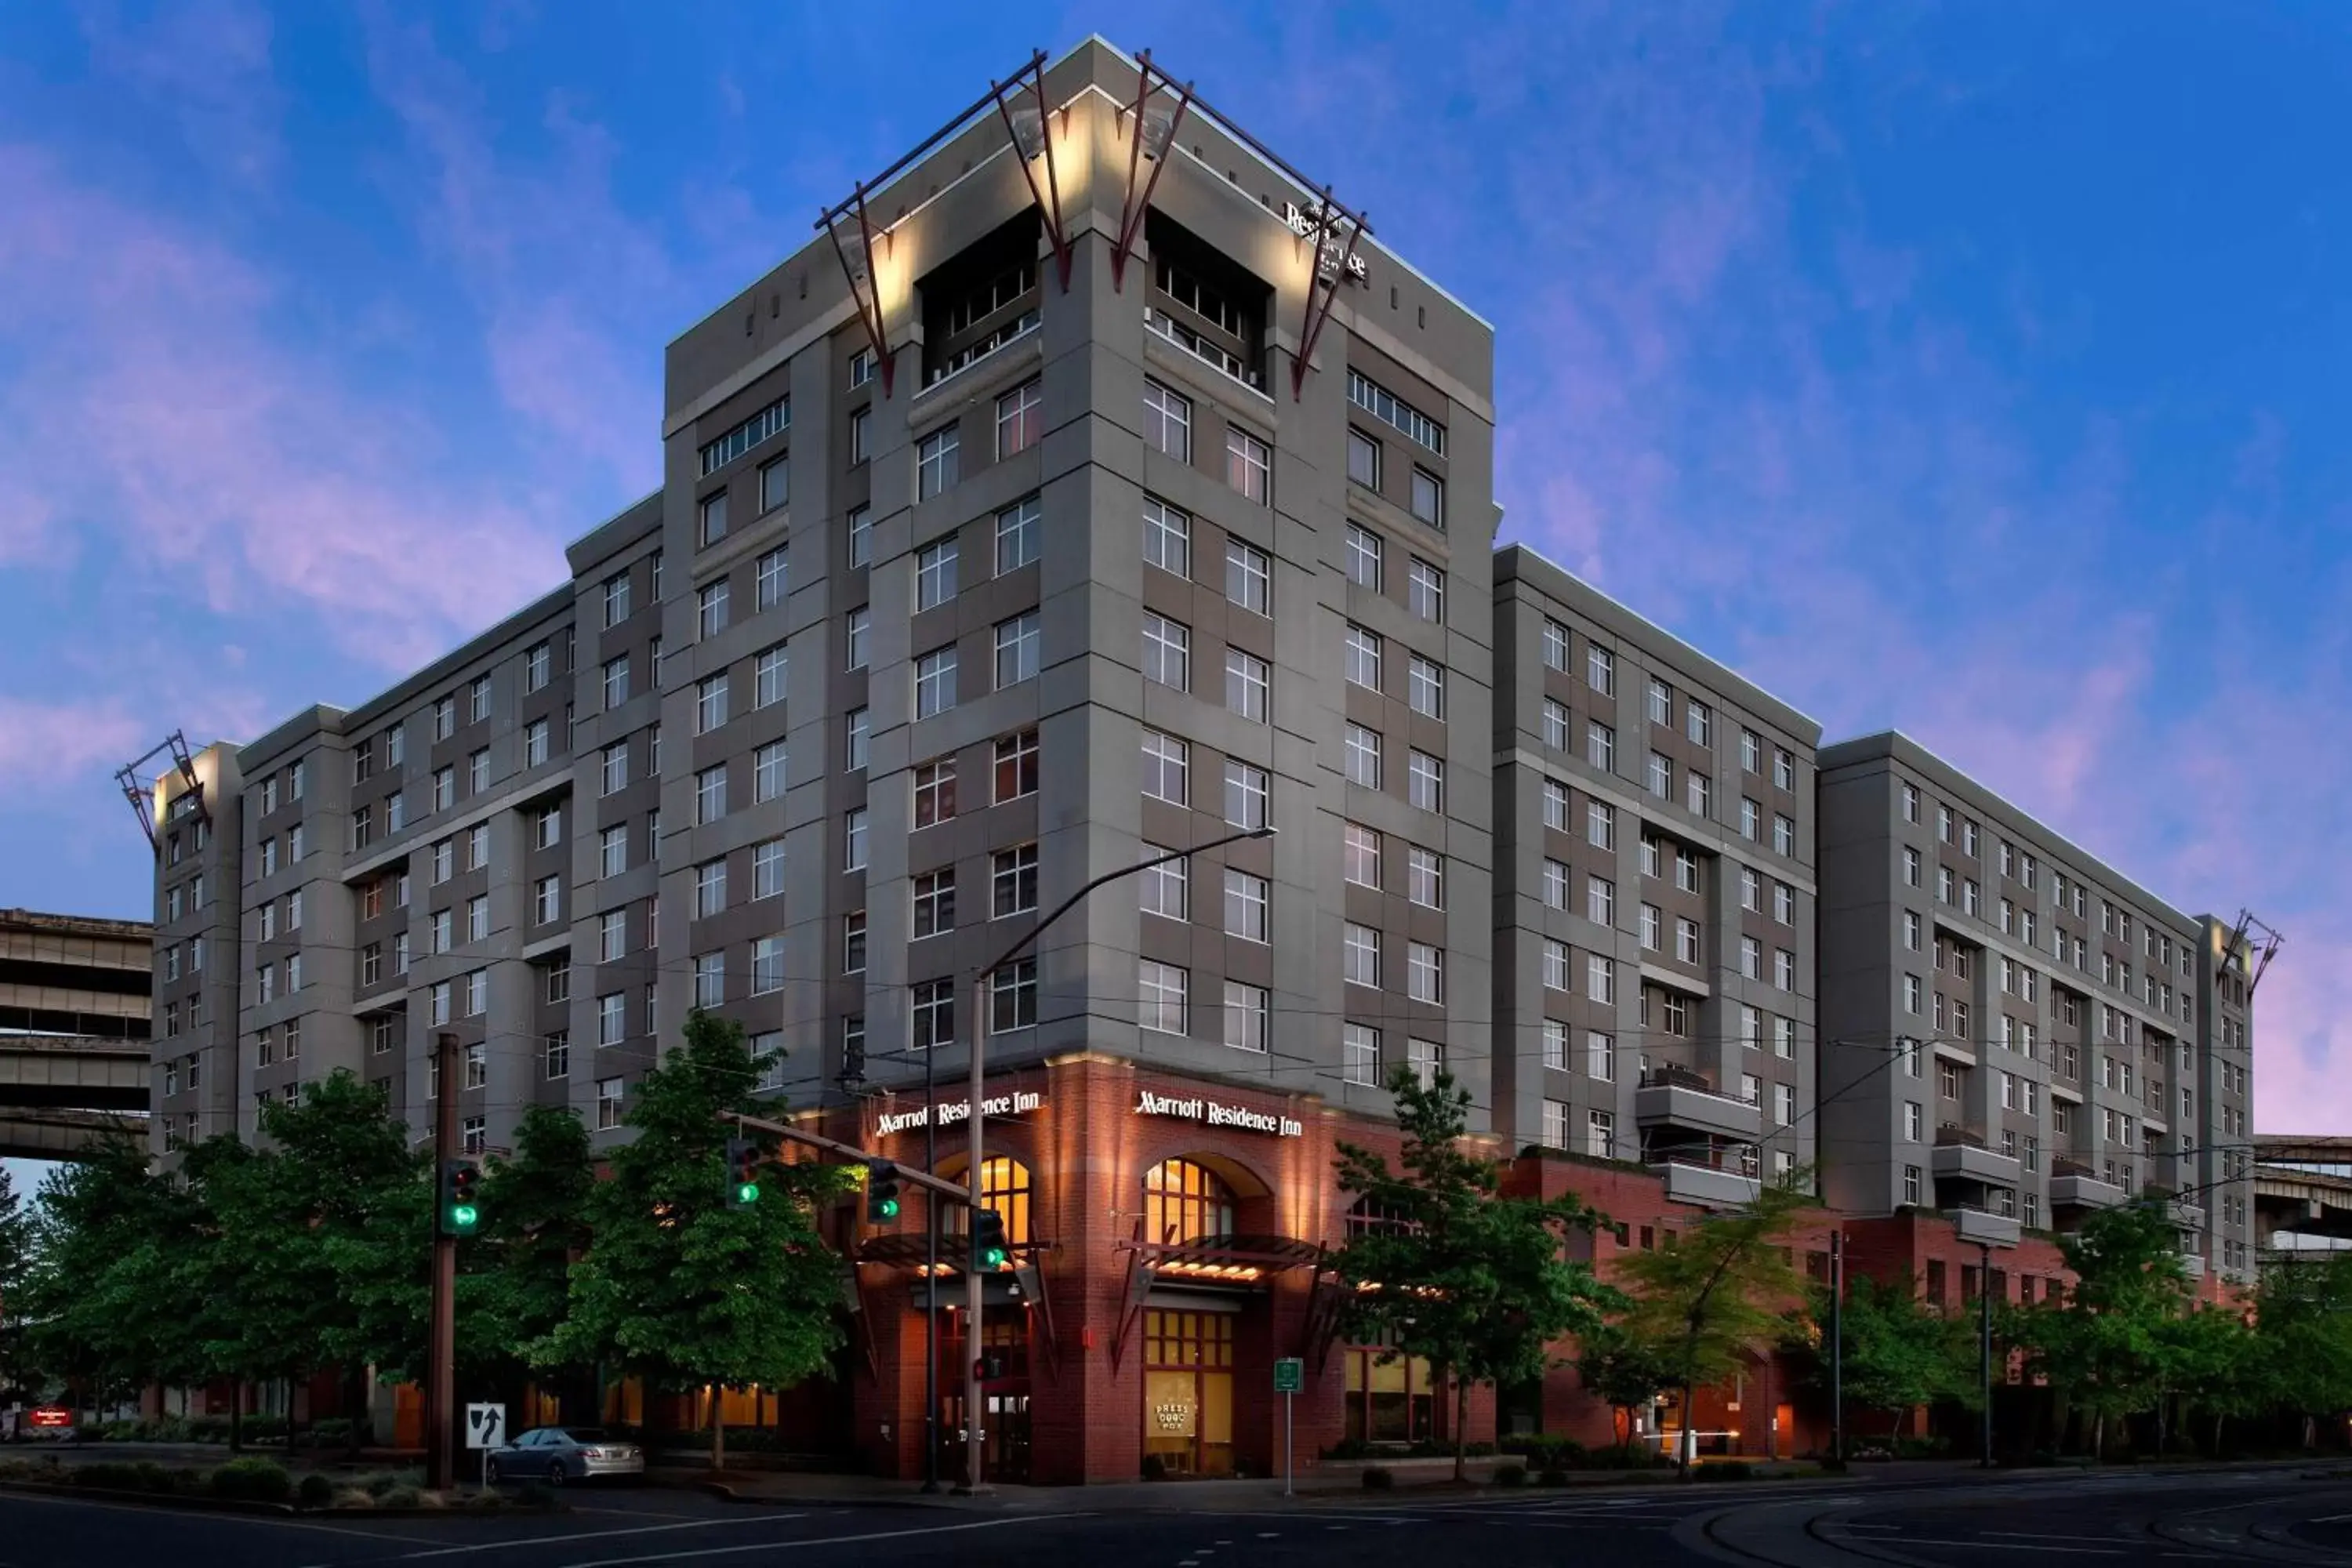 Property Building in Residence Inn Portland Downtown/RiverPlace